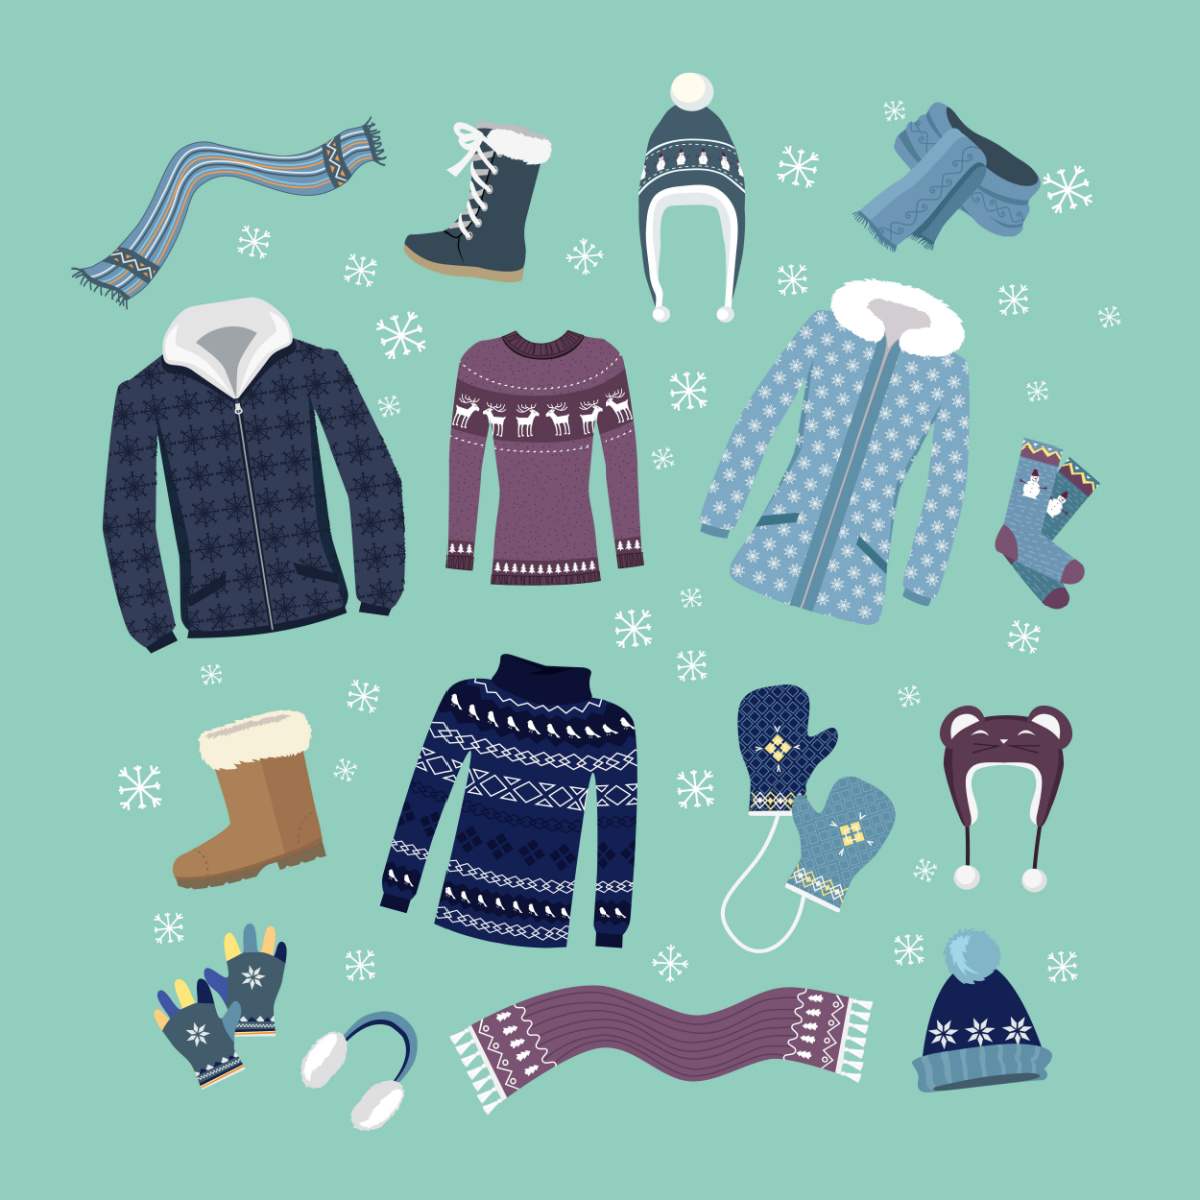 A mint colored background with illustrations of winter clothes (including jackets, earmuffs, hats, boots, mittens, sweaters and scarves) arranged on it.